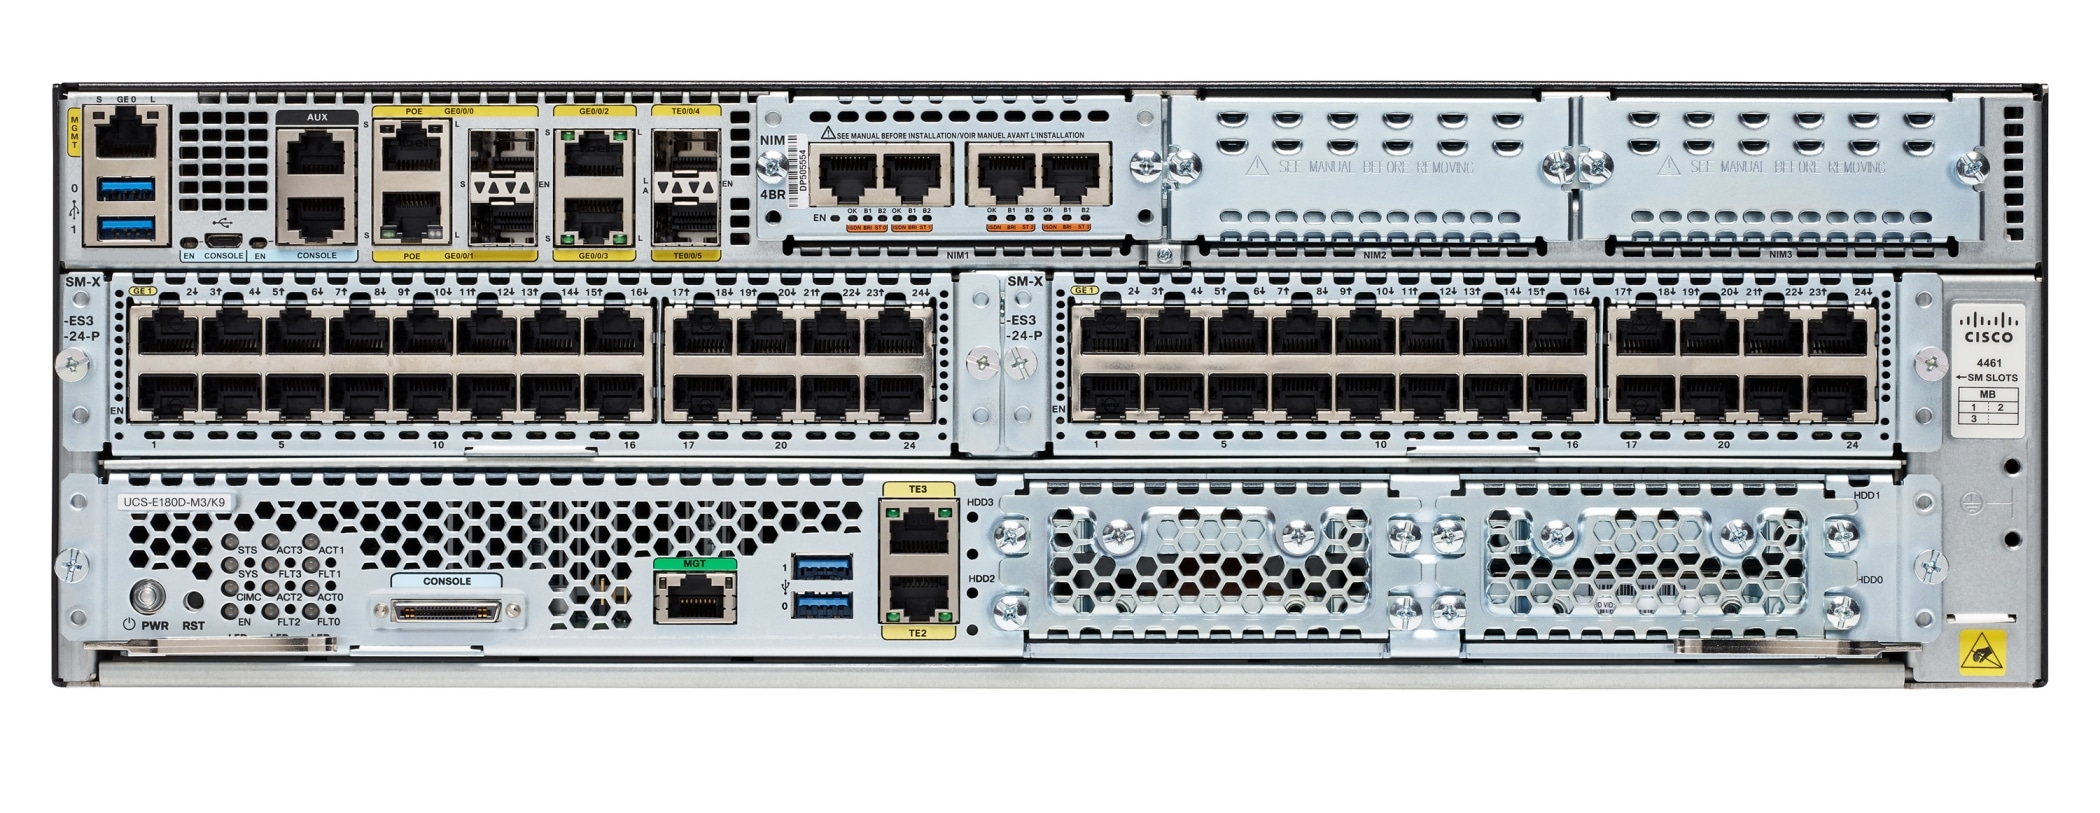 Product Image - Cisco 4000 Series Integrated Services Routers - Rear Stack